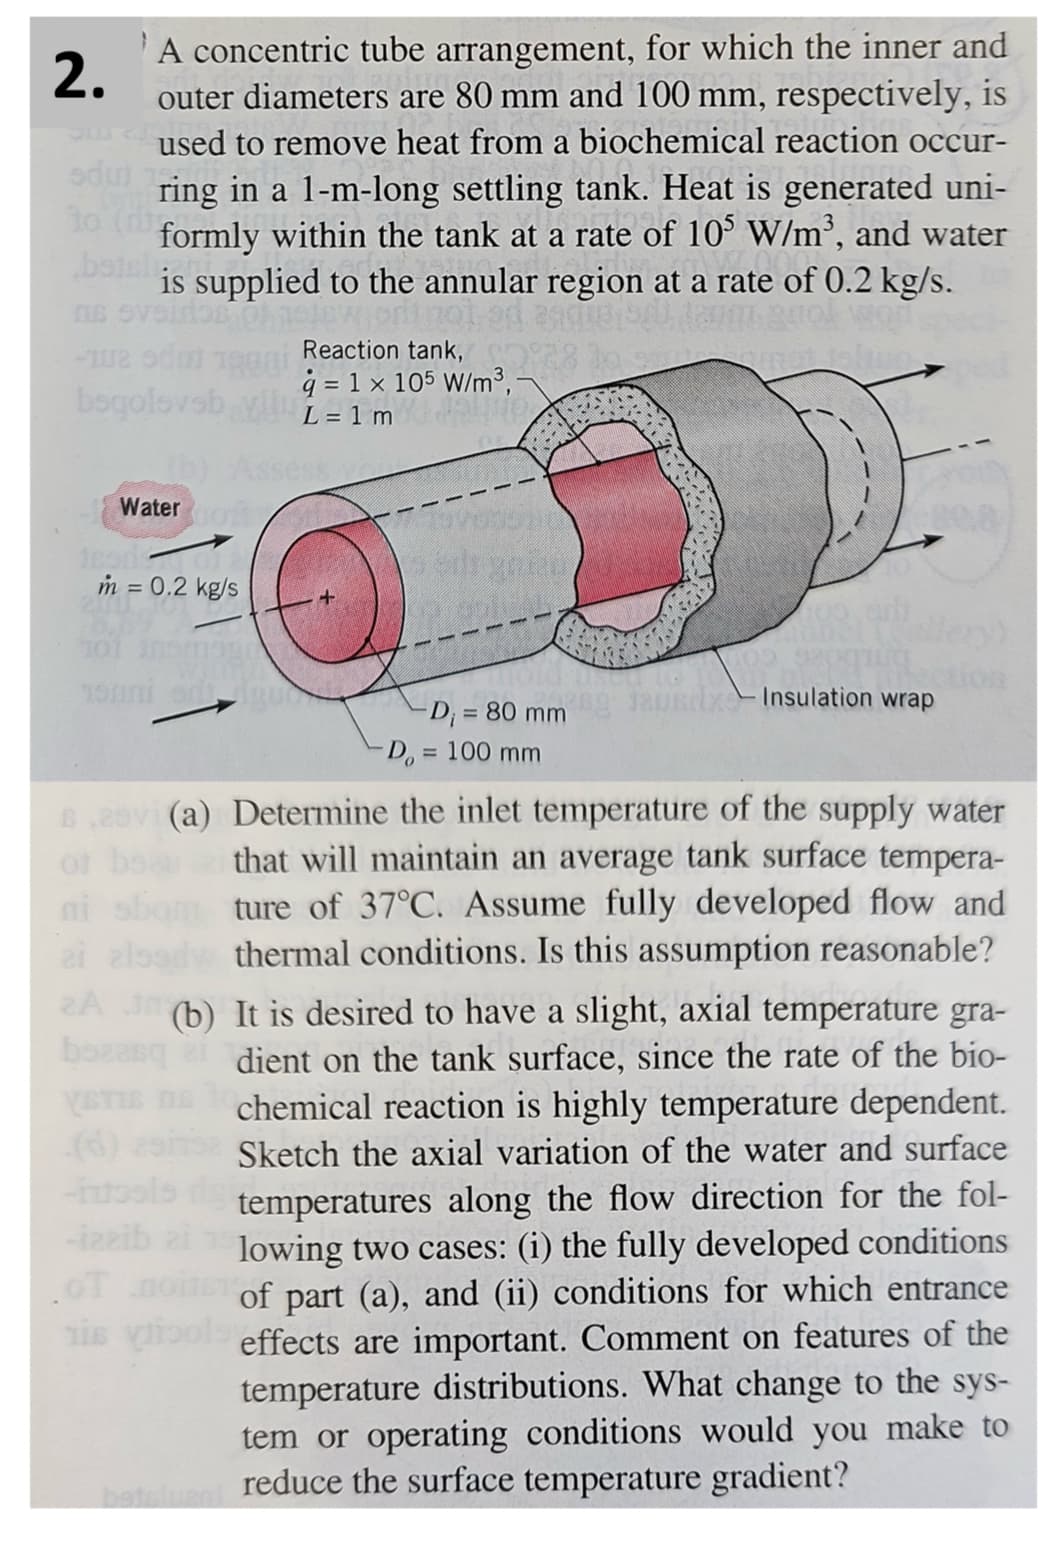 2.
A concentric tube arrangement, for which the inner and
outer diameters are 80 mm and 100 mm, respectively, is
used to remove heat from a biochemical reaction occur-
ring in a 1-m-long settling tank. Heat is generated uni-
to (di
formly within the tank at a rate of 105 W/m³, and water
is supplied to the annular region at a rate of 0.2 kg/s.
sdu)
betsl
CUS
-102 sdu
Reaction tank,
q= 1 x 105 W/m³,
boqolovsb L=1m
Water oxy
m = 0.2 kg/s
+
of
19
-D₁ = 80 mm
D = 100 mm
x-Insulation wrap
6,20vi (a) Determine the inlet temperature of the supply water
that will maintain an average tank surface tempera-
ture of 37°C. Assume fully developed flow and
thermal conditions. Is this assumption reasonable?
ni sb
ai als
bozasq
YSTIE
(d)
2A (b) It is desired to have a slight, axial temperature gra-
dient on the tank surface, since the rate of the bio-
chemical reaction is highly temperature dependent.
Sketch the axial variation of the water and surface
temperatures along the flow direction for the fol-
lowing two cases: (i) the fully developed conditions
of part (a), and (ii) conditions for which entrance
effects are important. Comment on features of the
temperature distributions. What change to the sys-
tem or operating conditions would you make to
betslag reduce the surface temperature gradient?
-izzib
OT
his vi